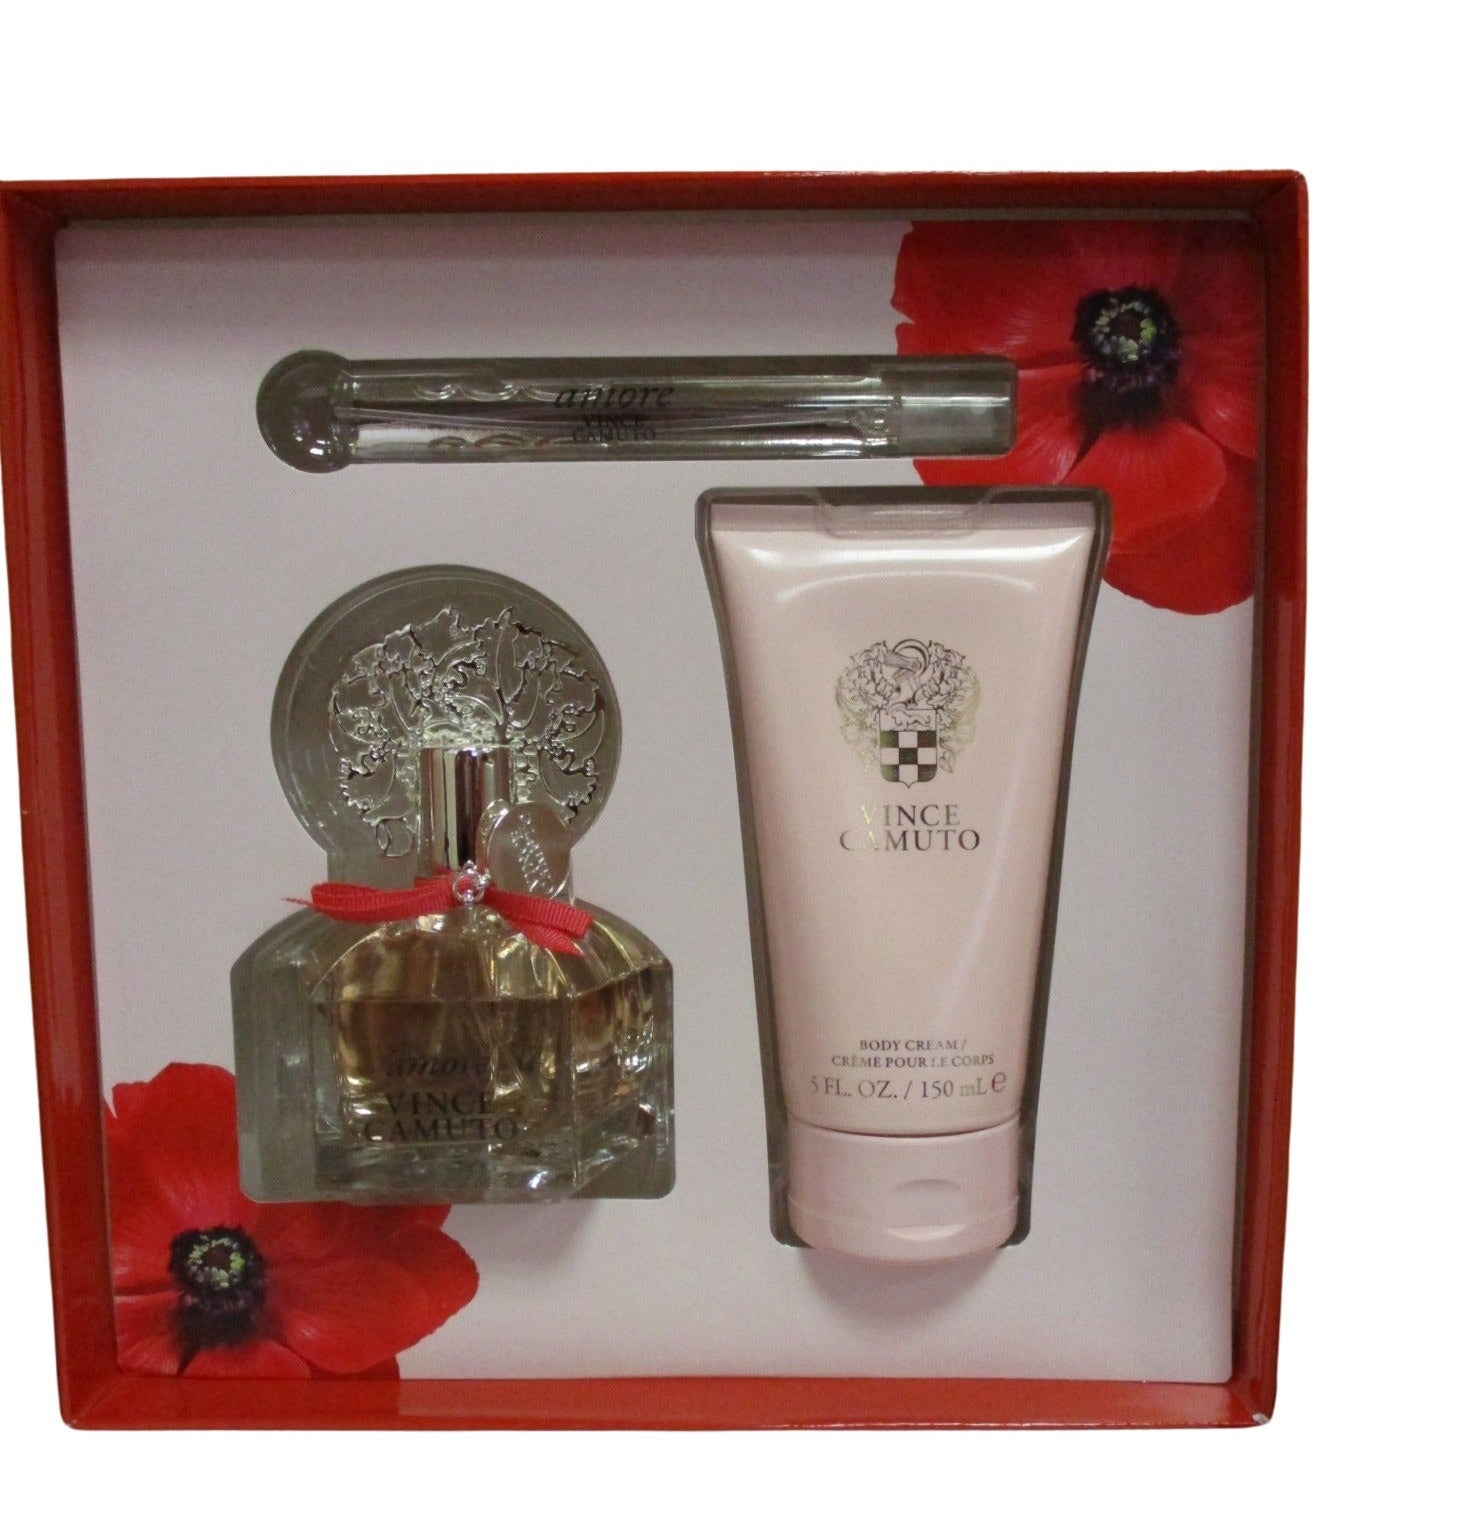 Vince Camuto Amore Gift Set 3 Piece – Hair Care & Beauty